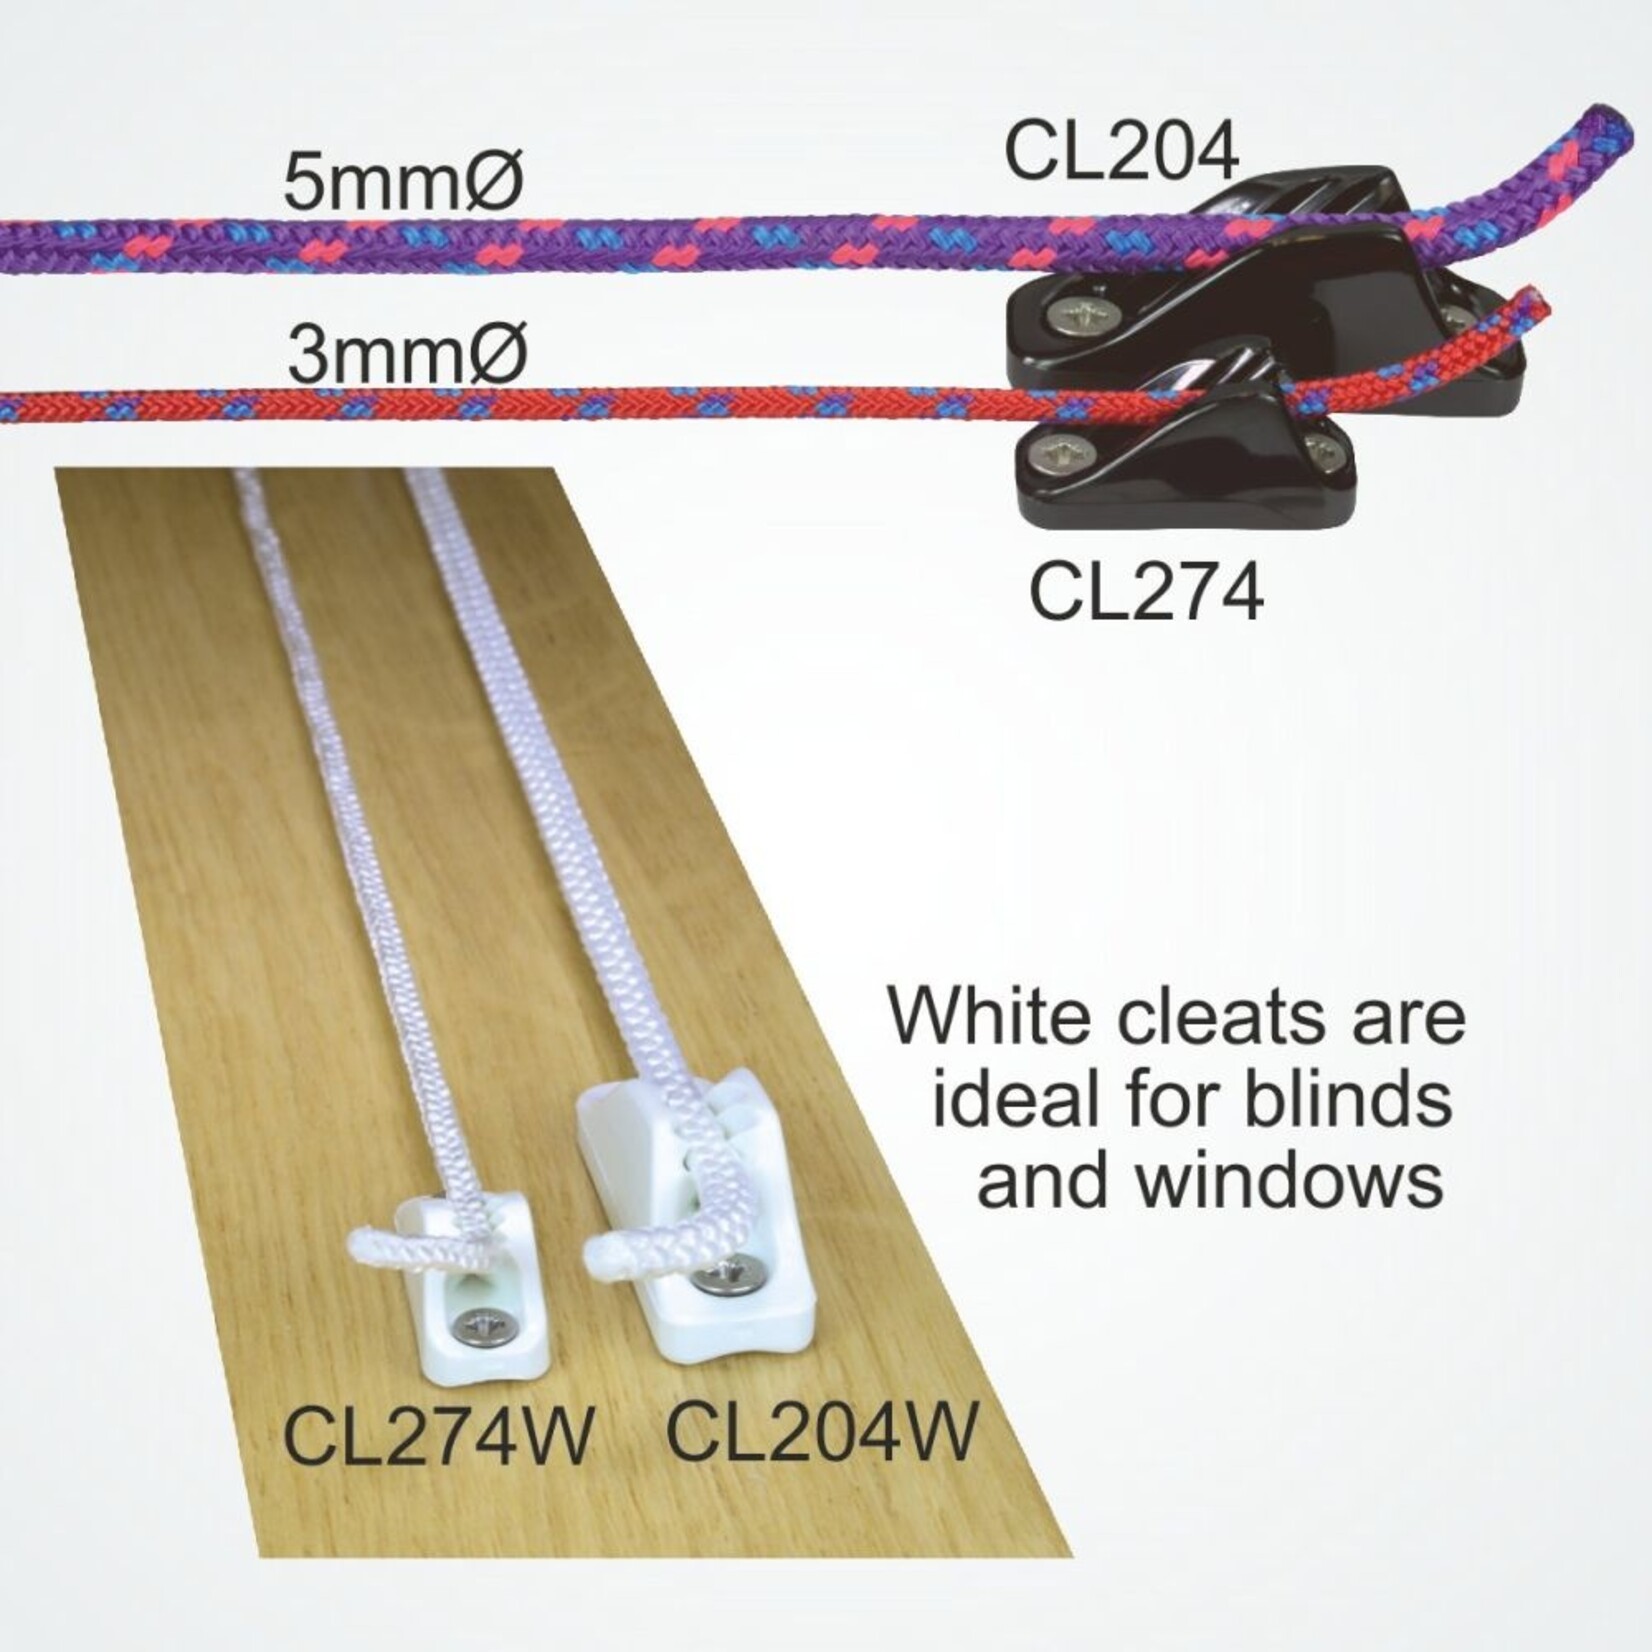 Clamcleat Open Micros - Set of 2